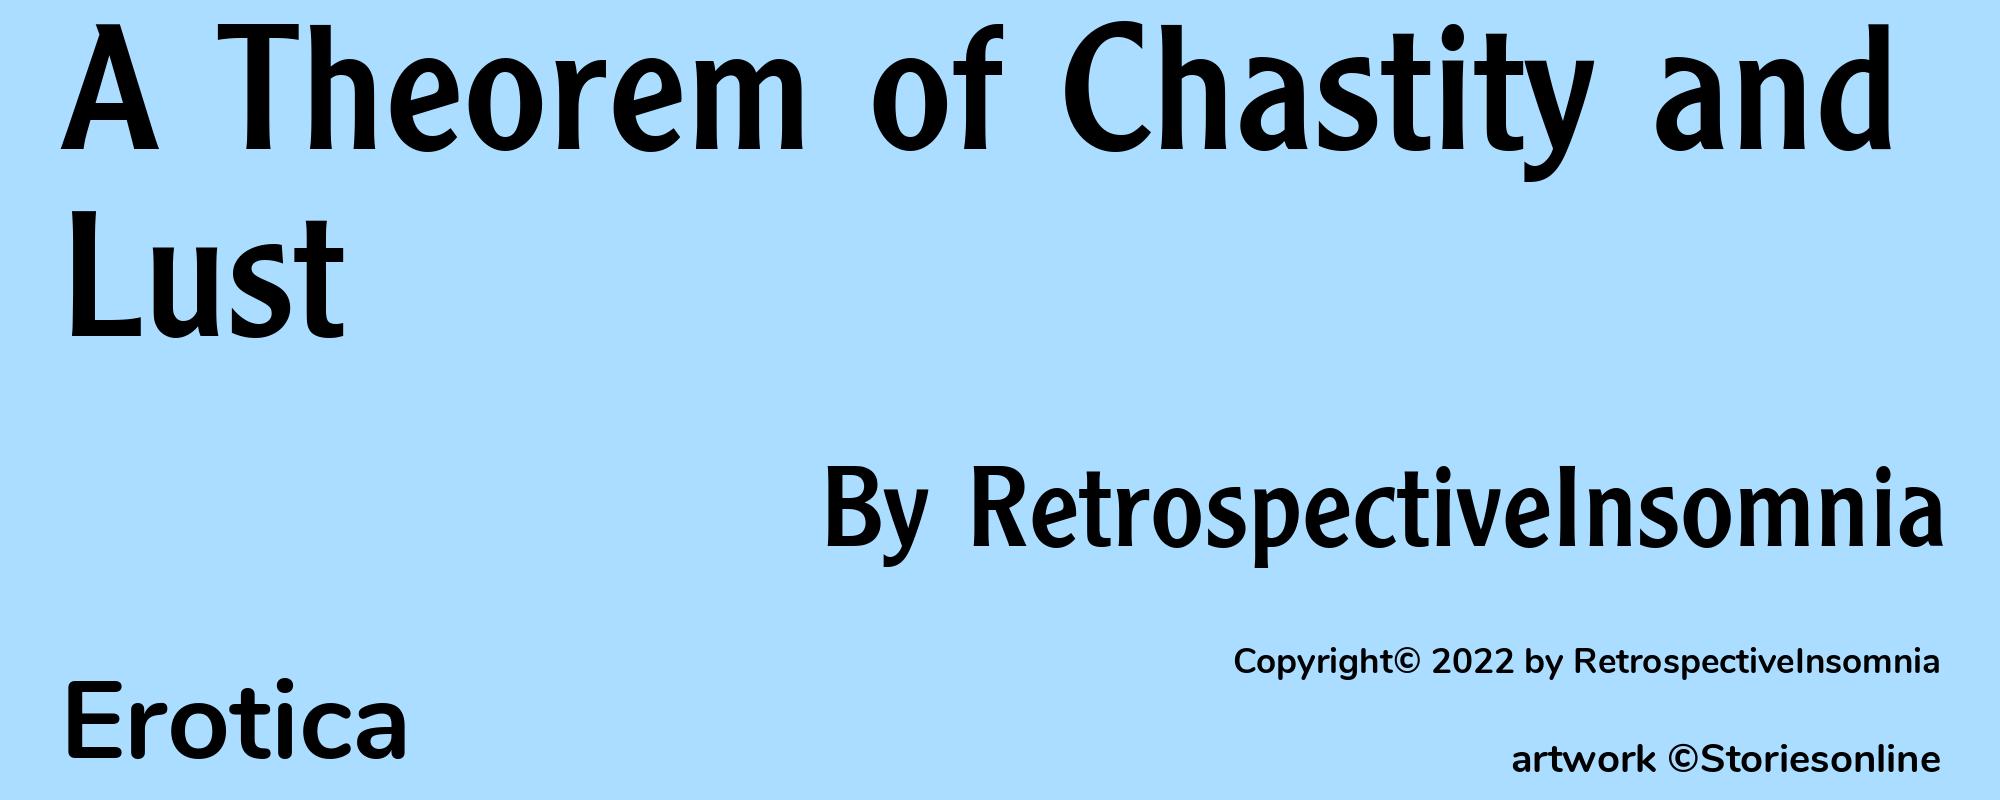 A Theorem of Chastity and Lust - Cover